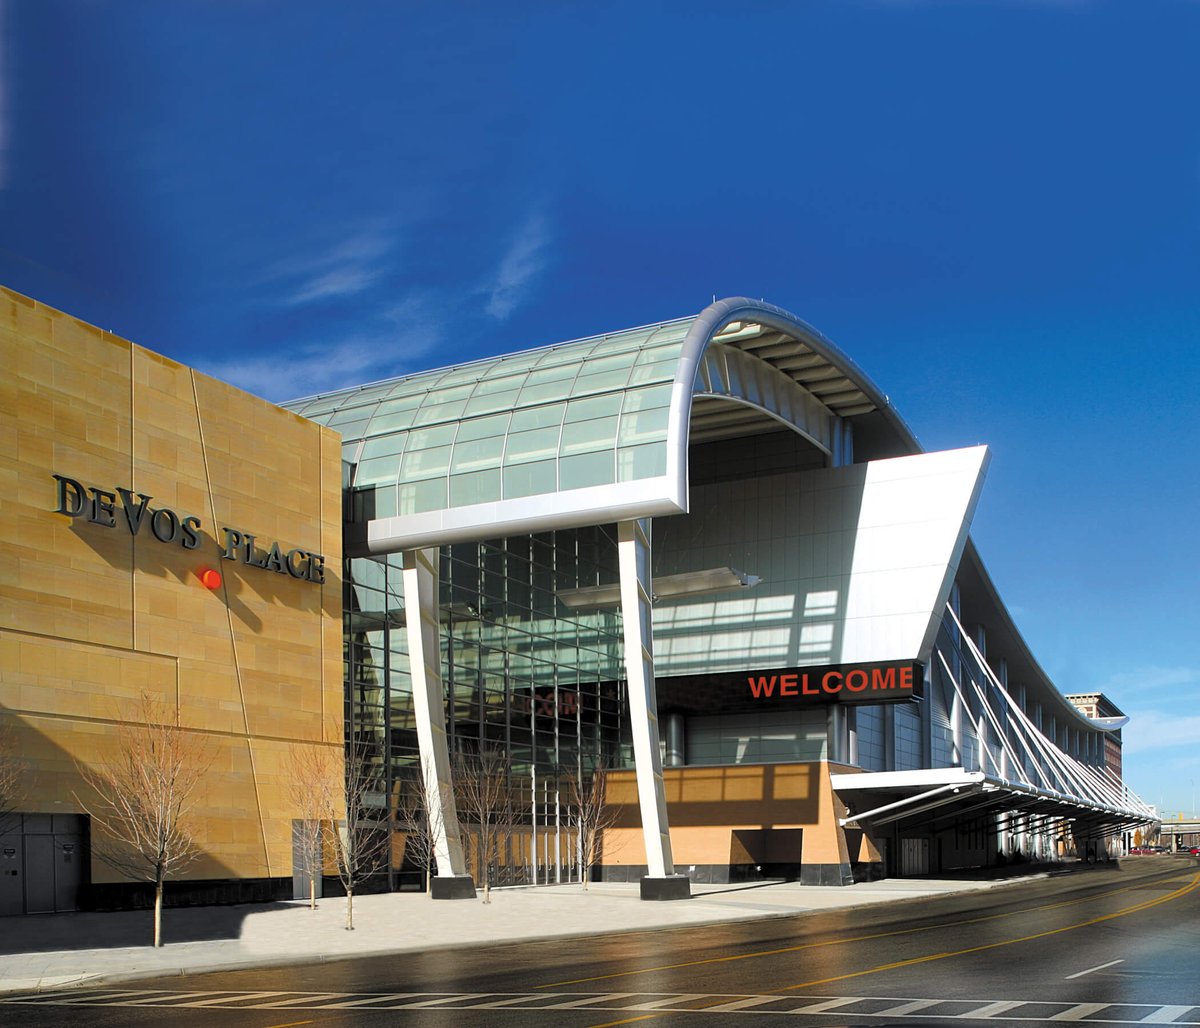 DeVos Place Convention Center – a perfect fit for your next event!